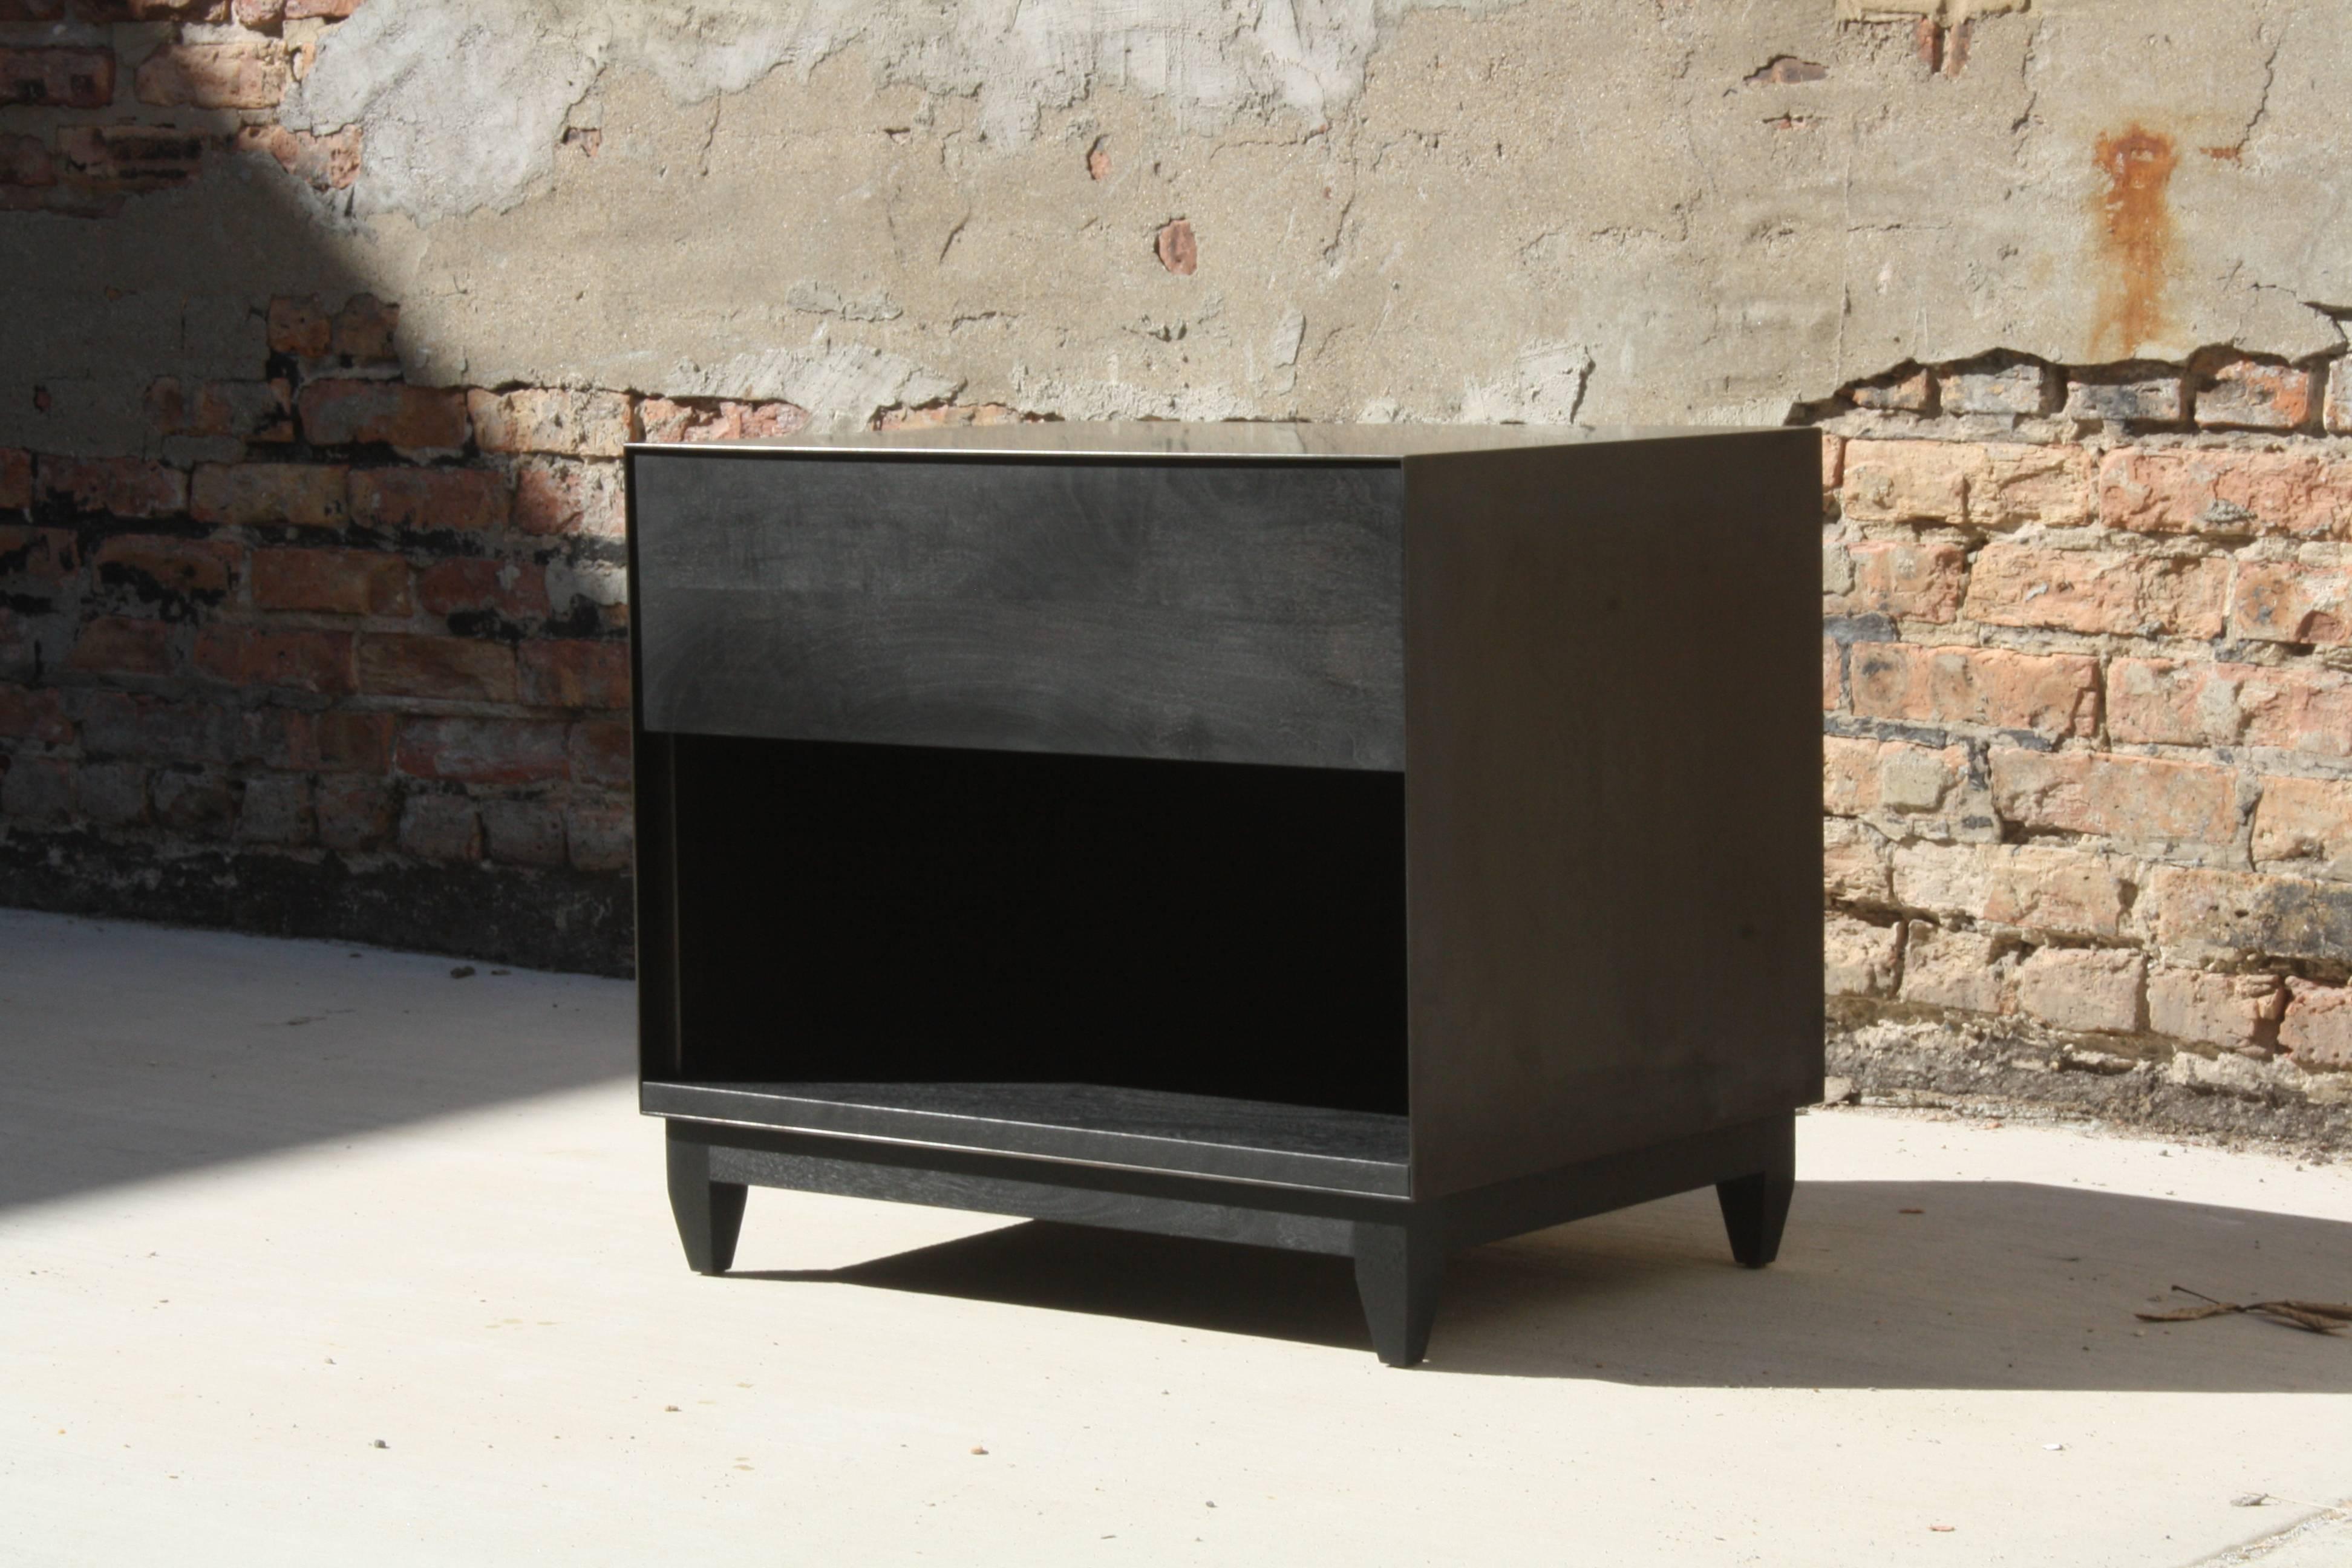 Handmade in Chicago by Laylo Studio, this customizable nightstand or end table features a blackened steel case with soft close drawer runners and a solid wood interior, drawer front and base. The patinated metal case allows for a minimal front edge